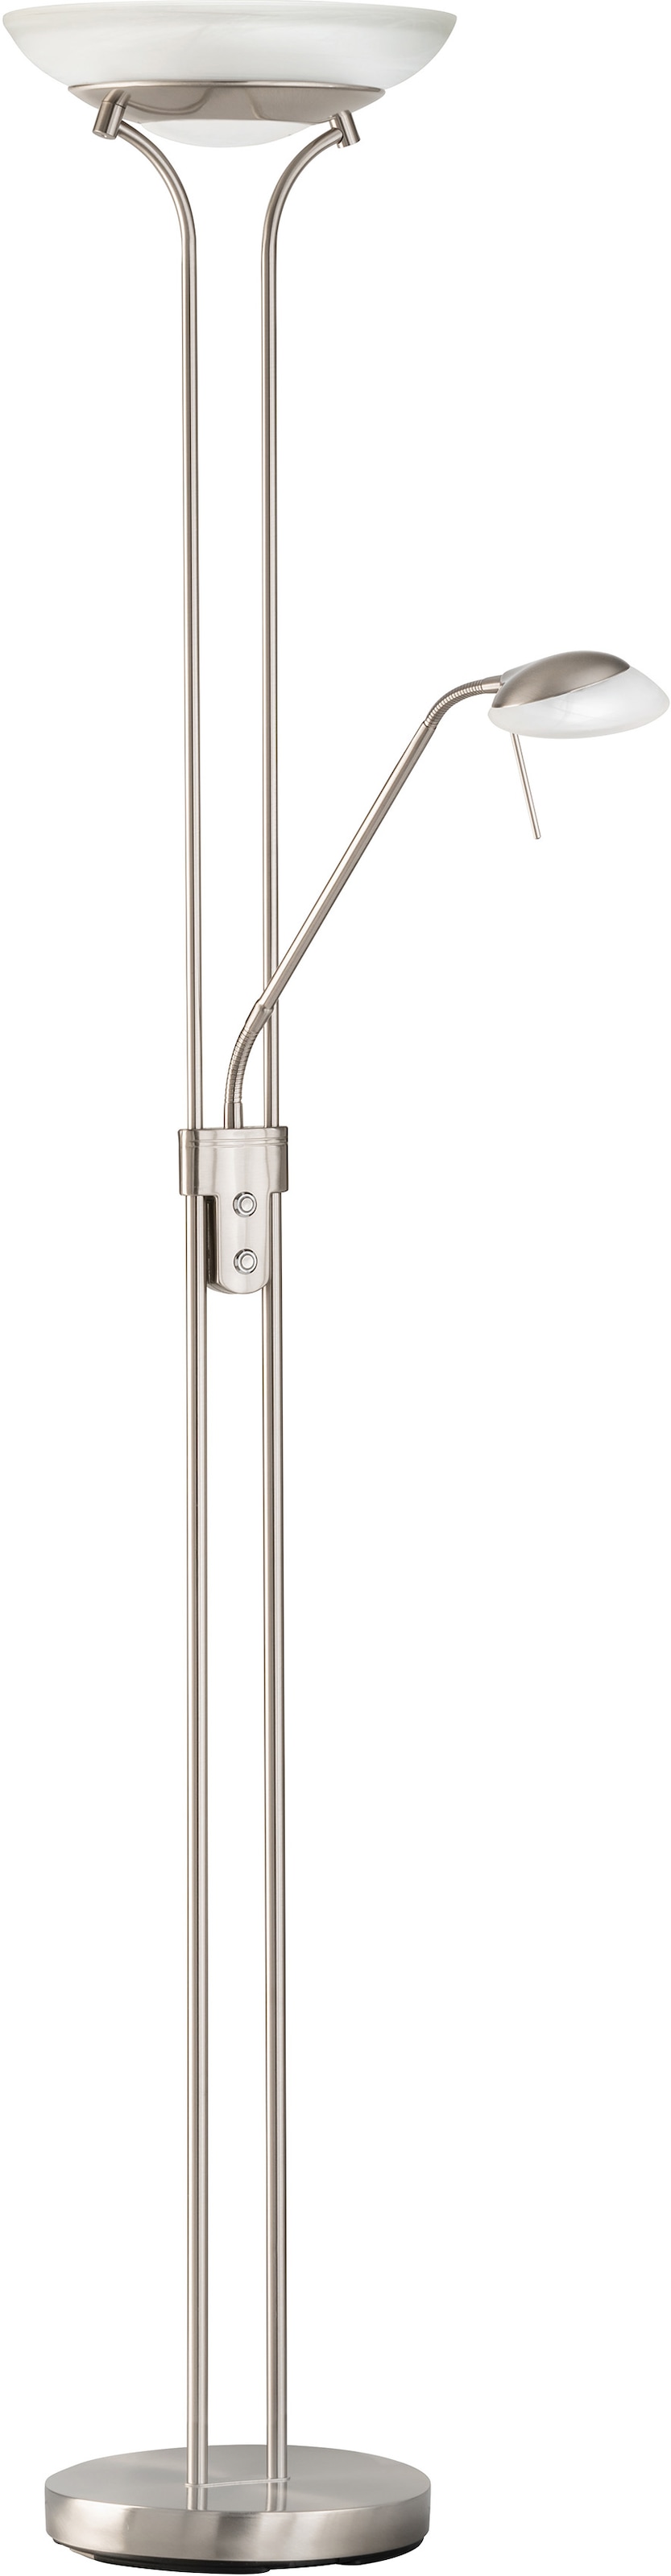 & flammig-flammig TW«, 1 HONSEL Stehlampe »Pool LED bei OTTO FISCHER